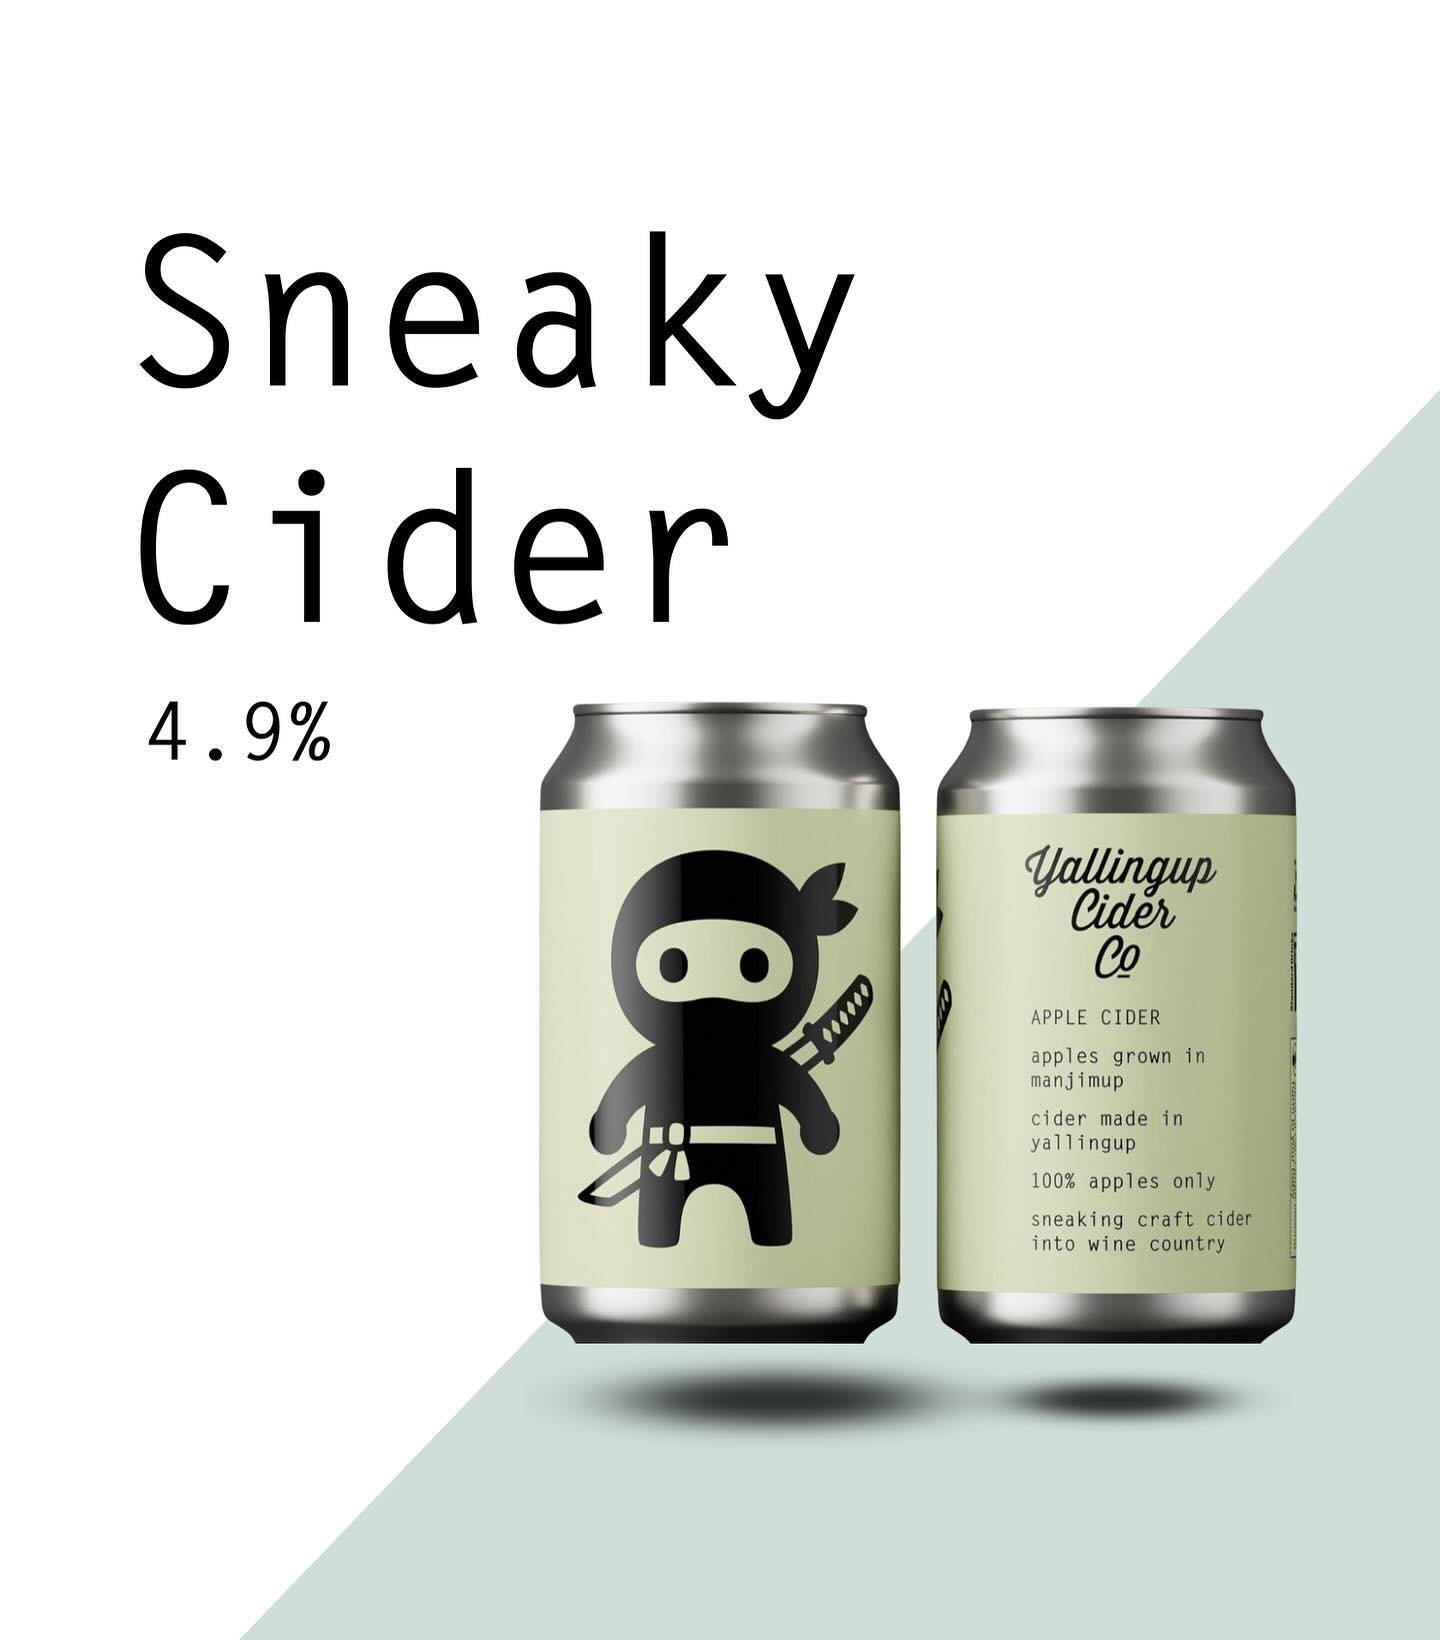 Have you tried our Sneaky cider yet?
&thinsp;&thinsp;&thinsp;&thinsp;&thinsp;&thinsp;
&thinsp;&thinsp;
&thinsp;&thinsp;&thinsp;&thinsp;&thinsp;&hellip;have a sneaky one 🥷 🍻 &thinsp;&thinsp;&thinsp;&thinsp;&thinsp;&thinsp;
&thinsp;&thinsp;&thinsp;&t